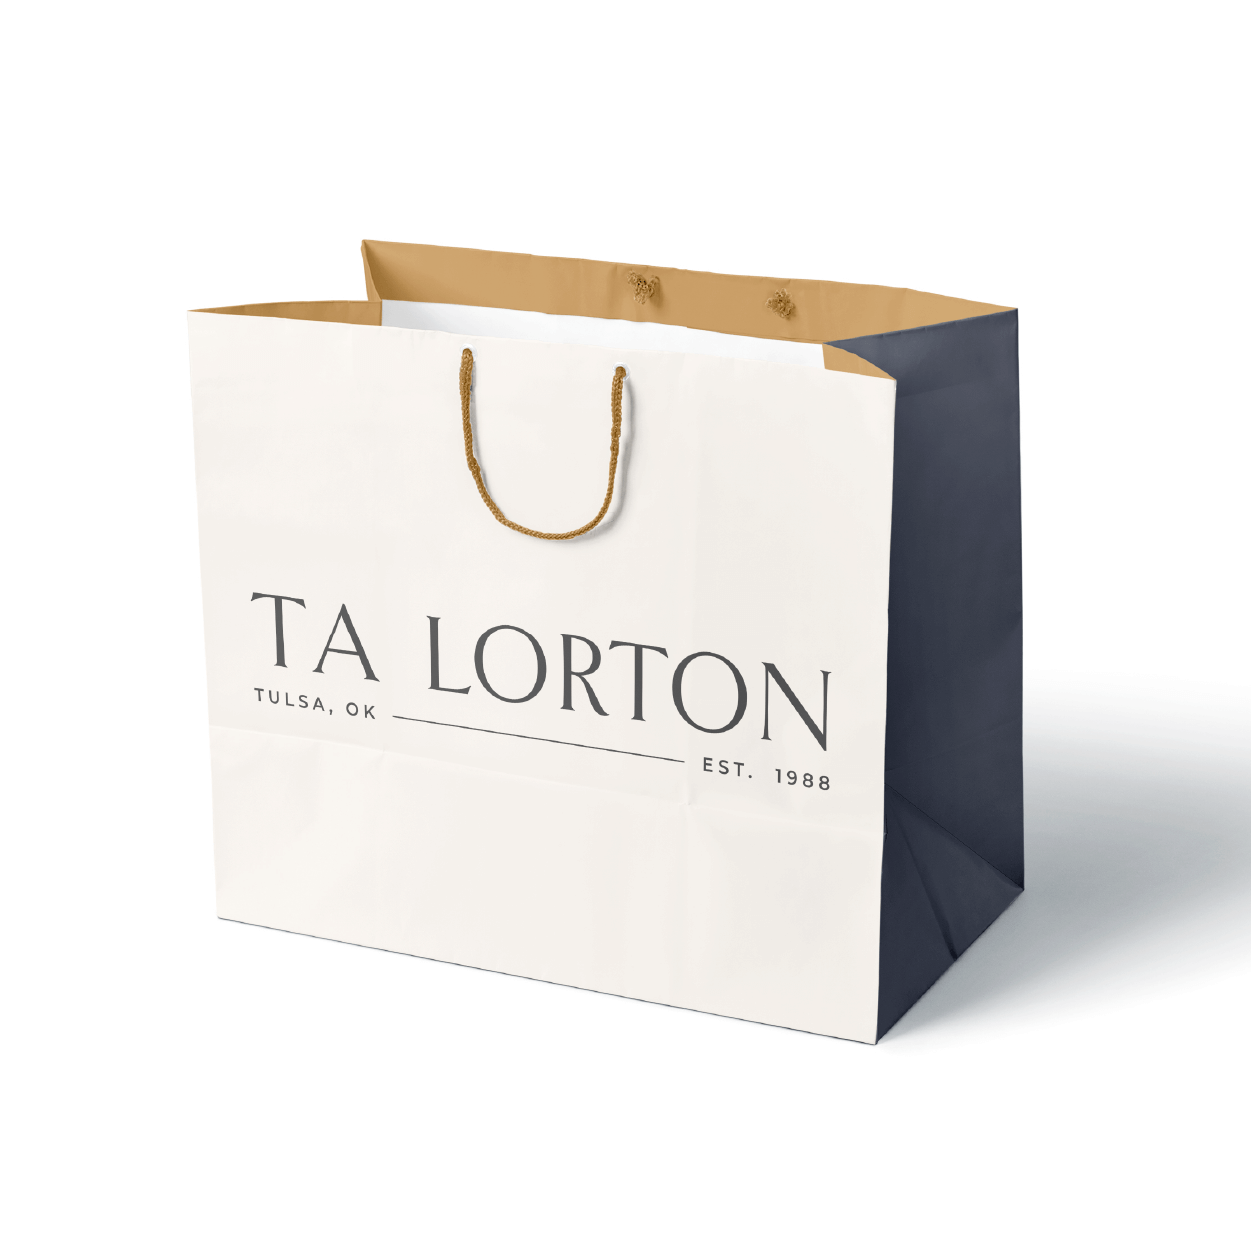 clean-modern-design-for-paper-shopping-bag-with-wordmark-loog-on-front.png